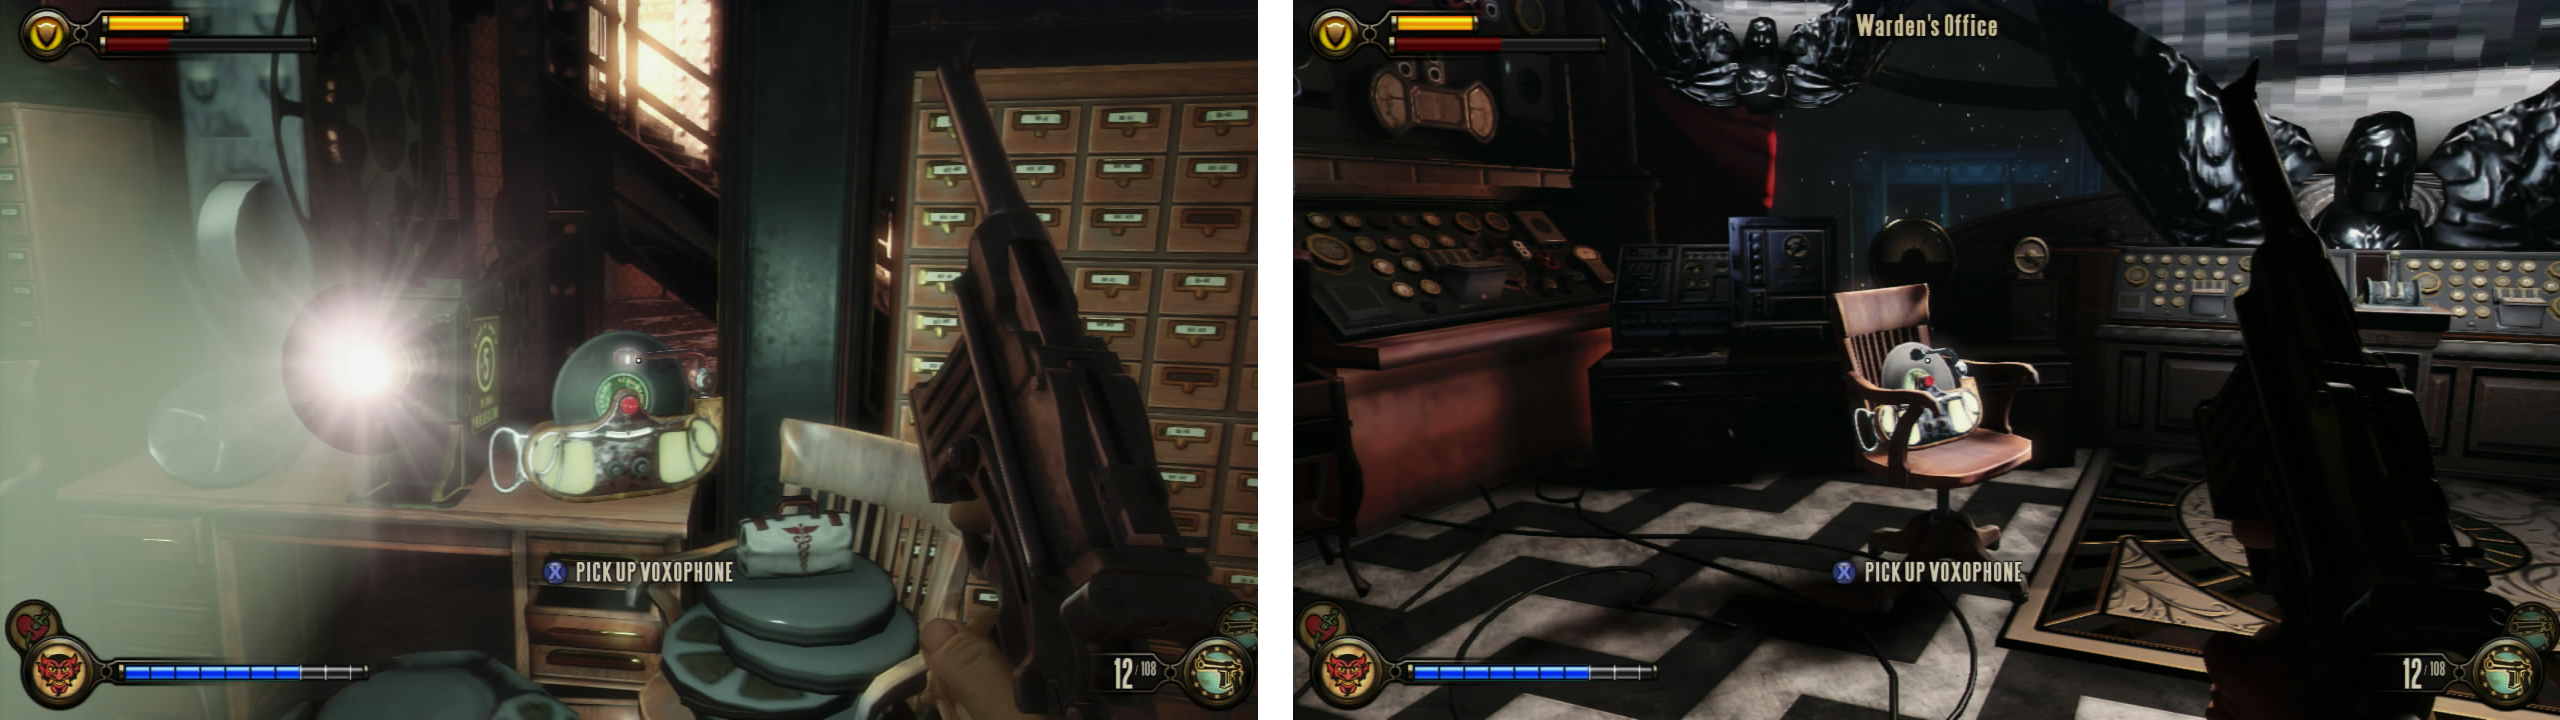 There is a Voxophone on a desk with a projector (left). Upstairs, there is another in the control room (right).